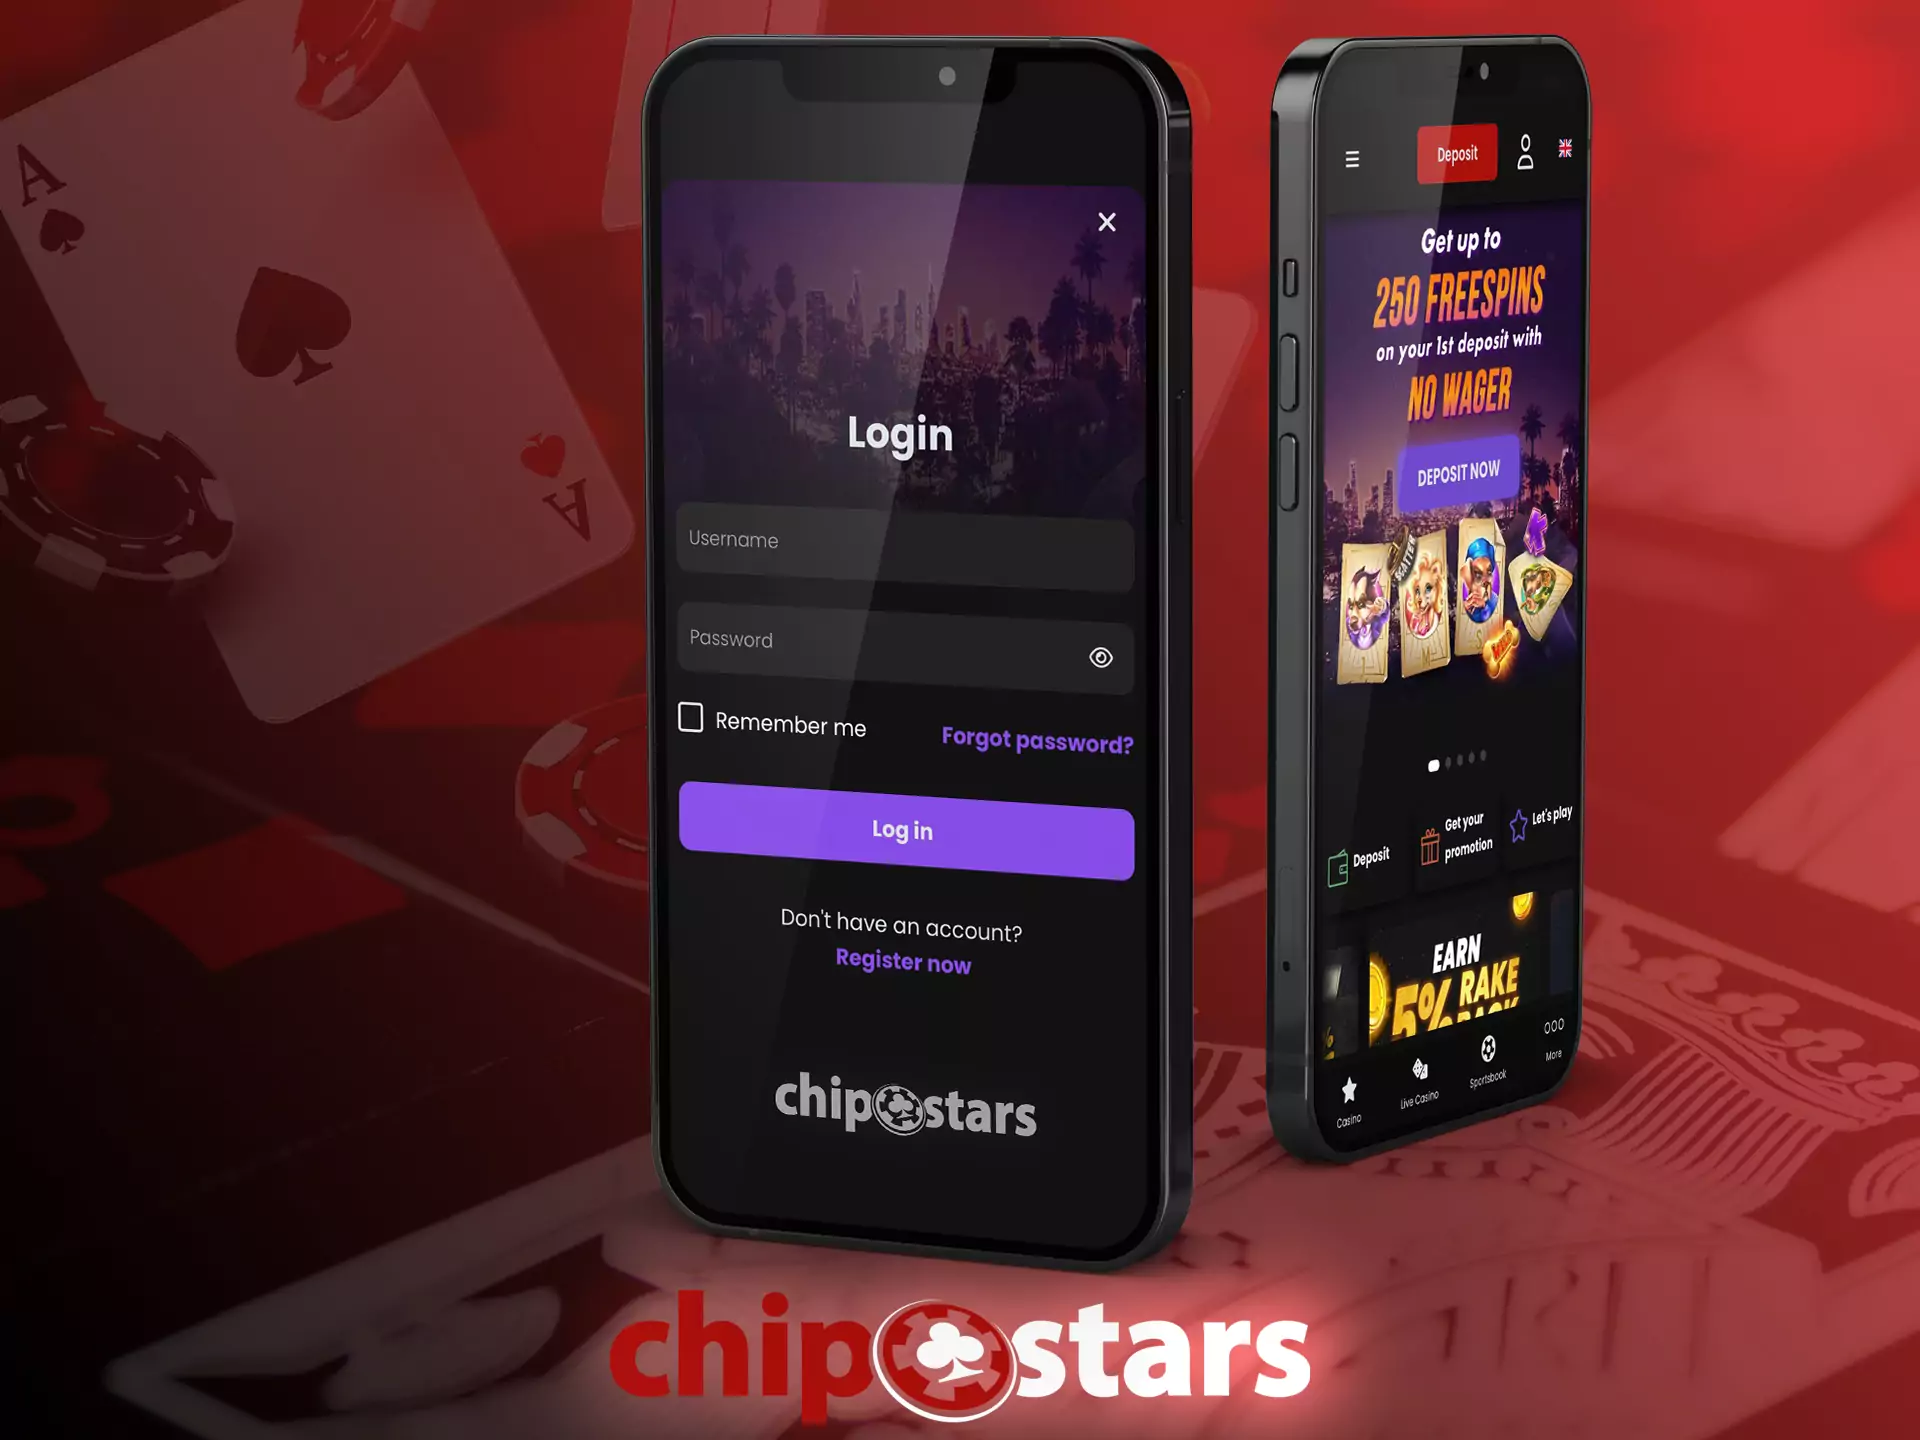 Run the Chipstars site and use your username and password to log in.